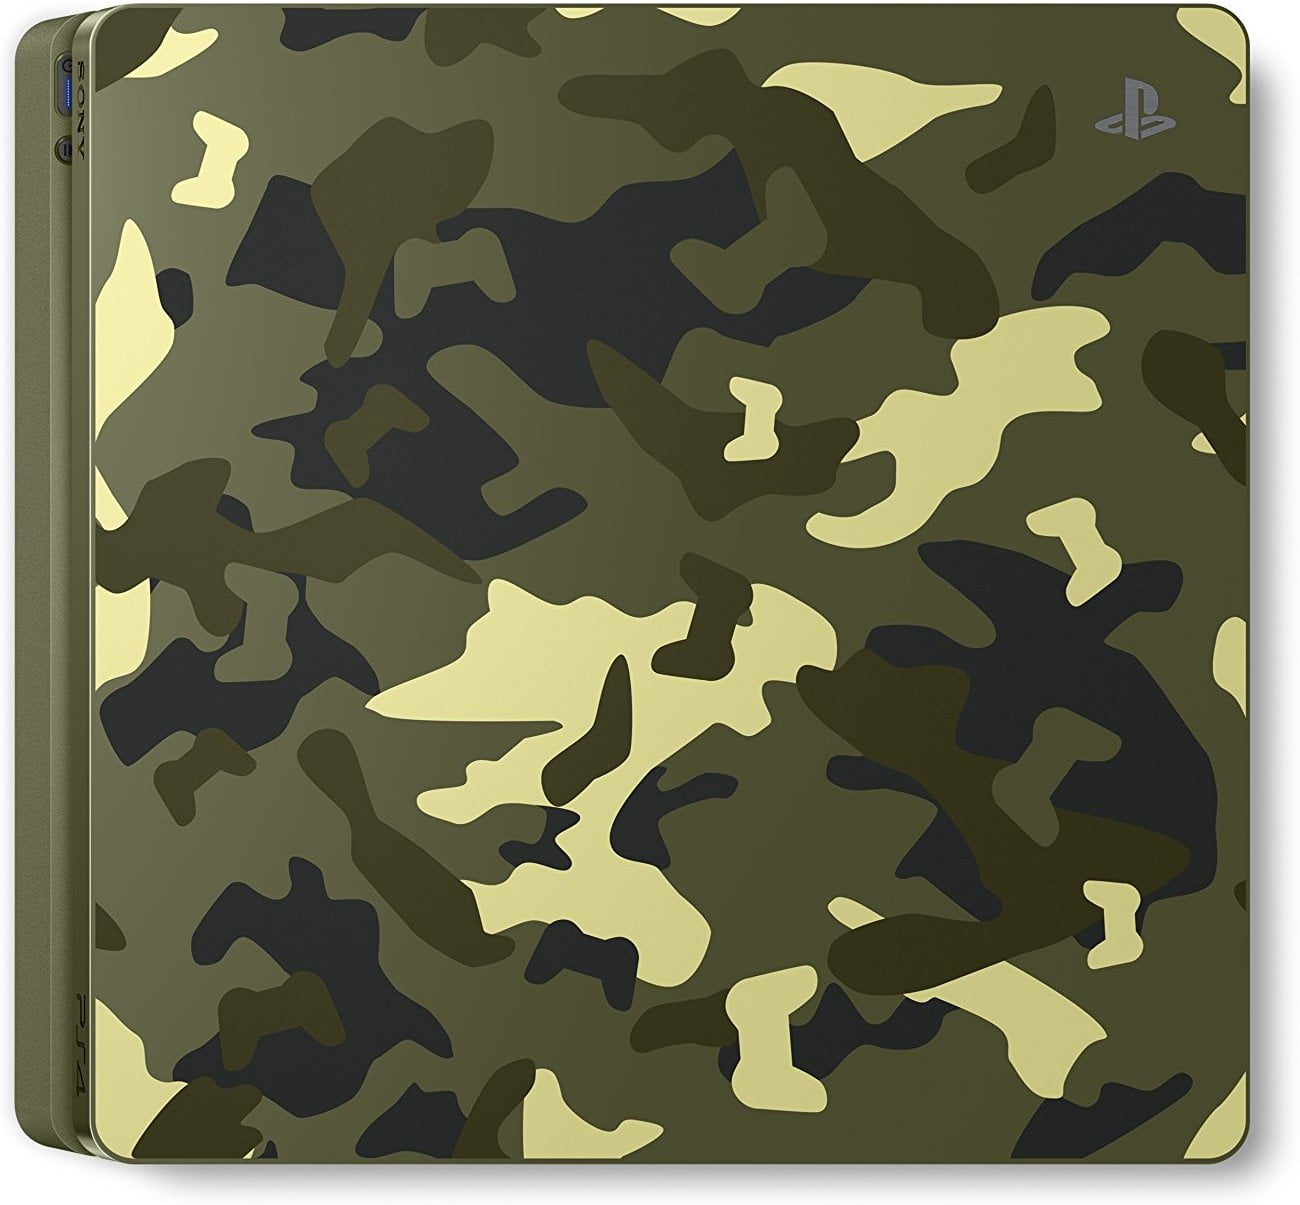 ps4 call of duty ww2 edition